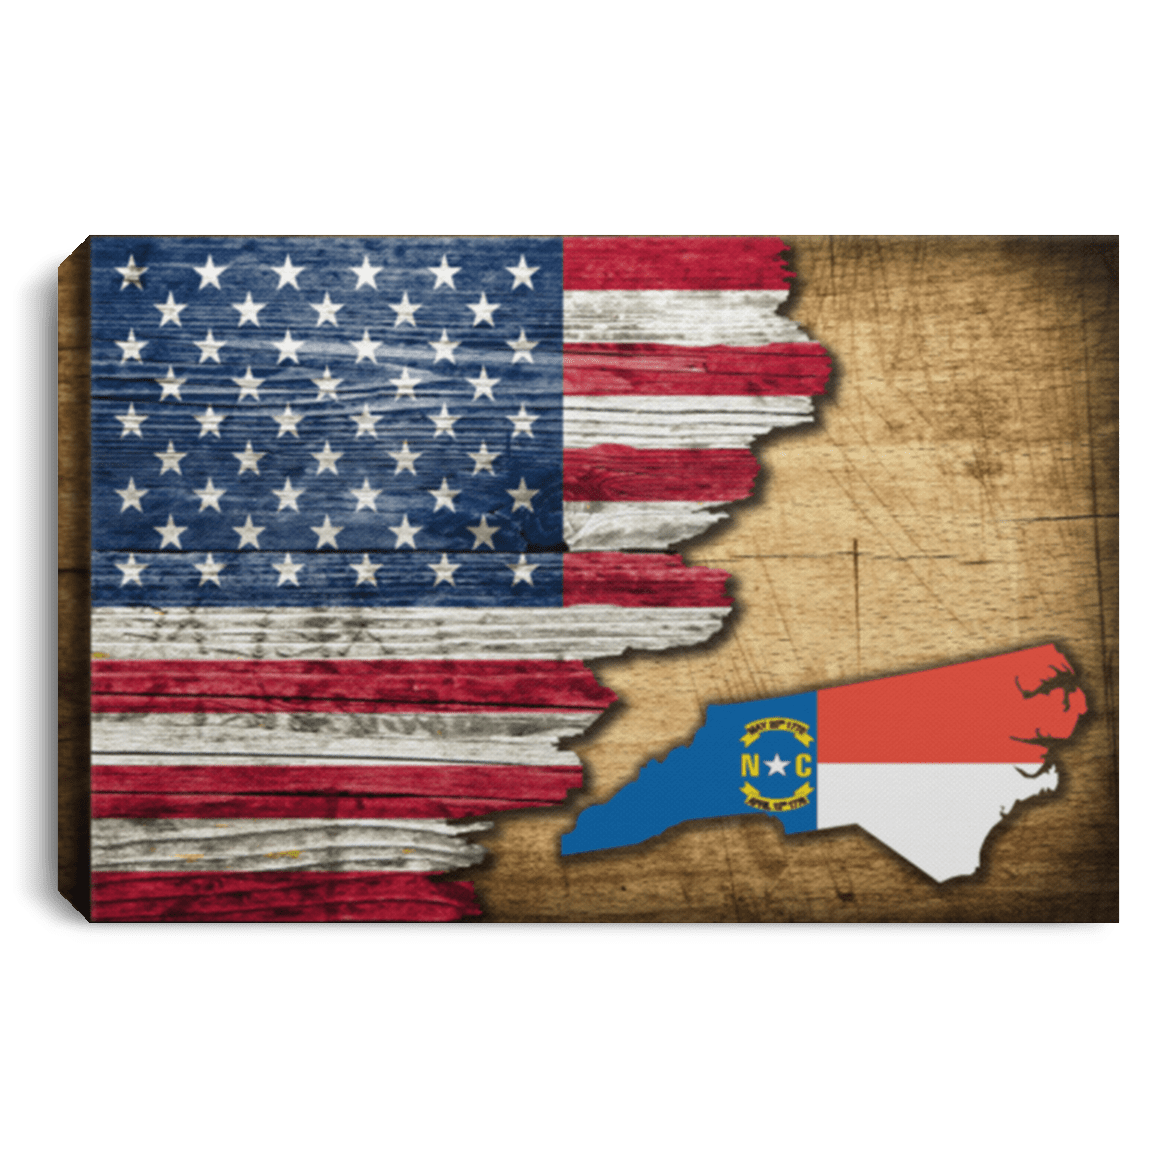 United States/North Carolina Flag Ripped Effect 12X8 Inches Landscape Canvas .75In Frame